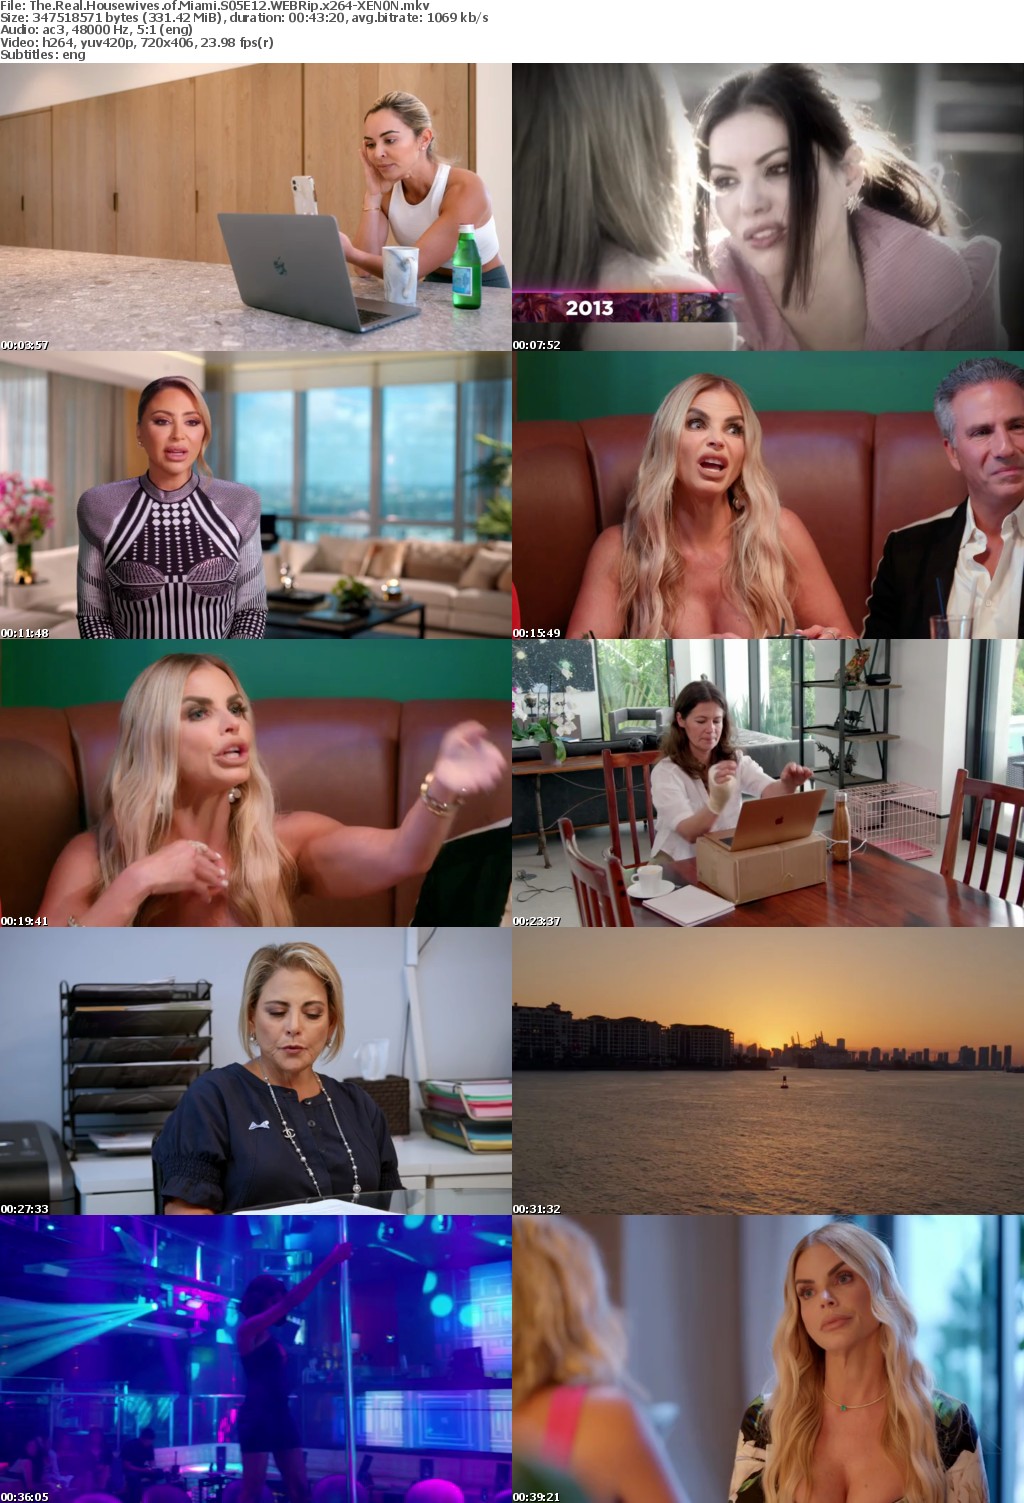 The Real Housewives of Miami S05E12 WEBRip x264-XEN0N